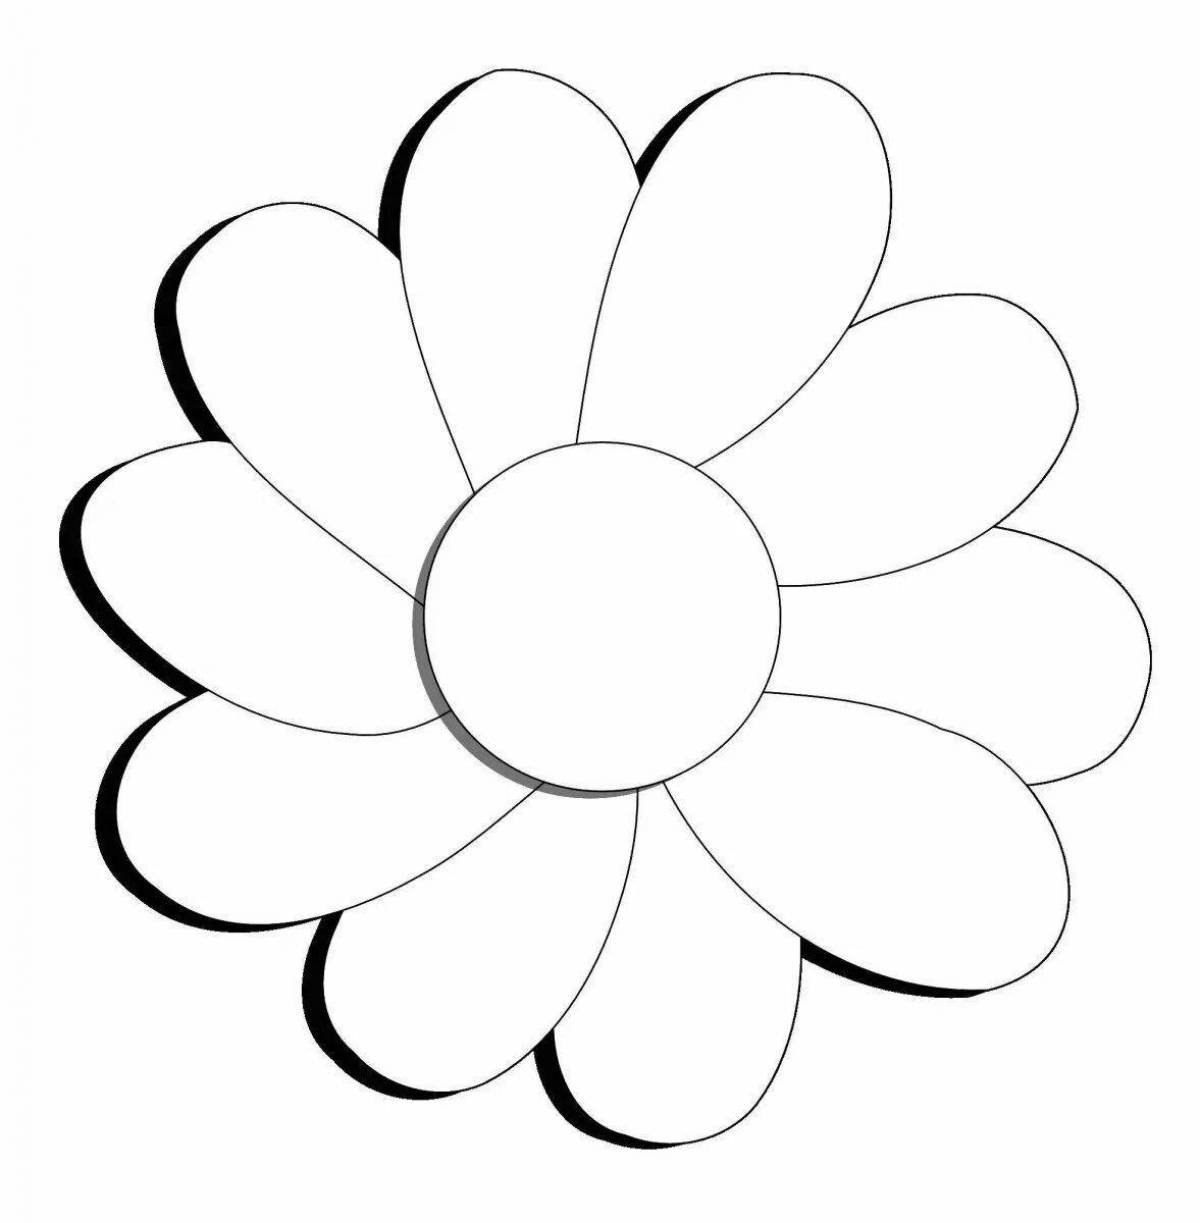 Coloring page graceful chamomile flowers